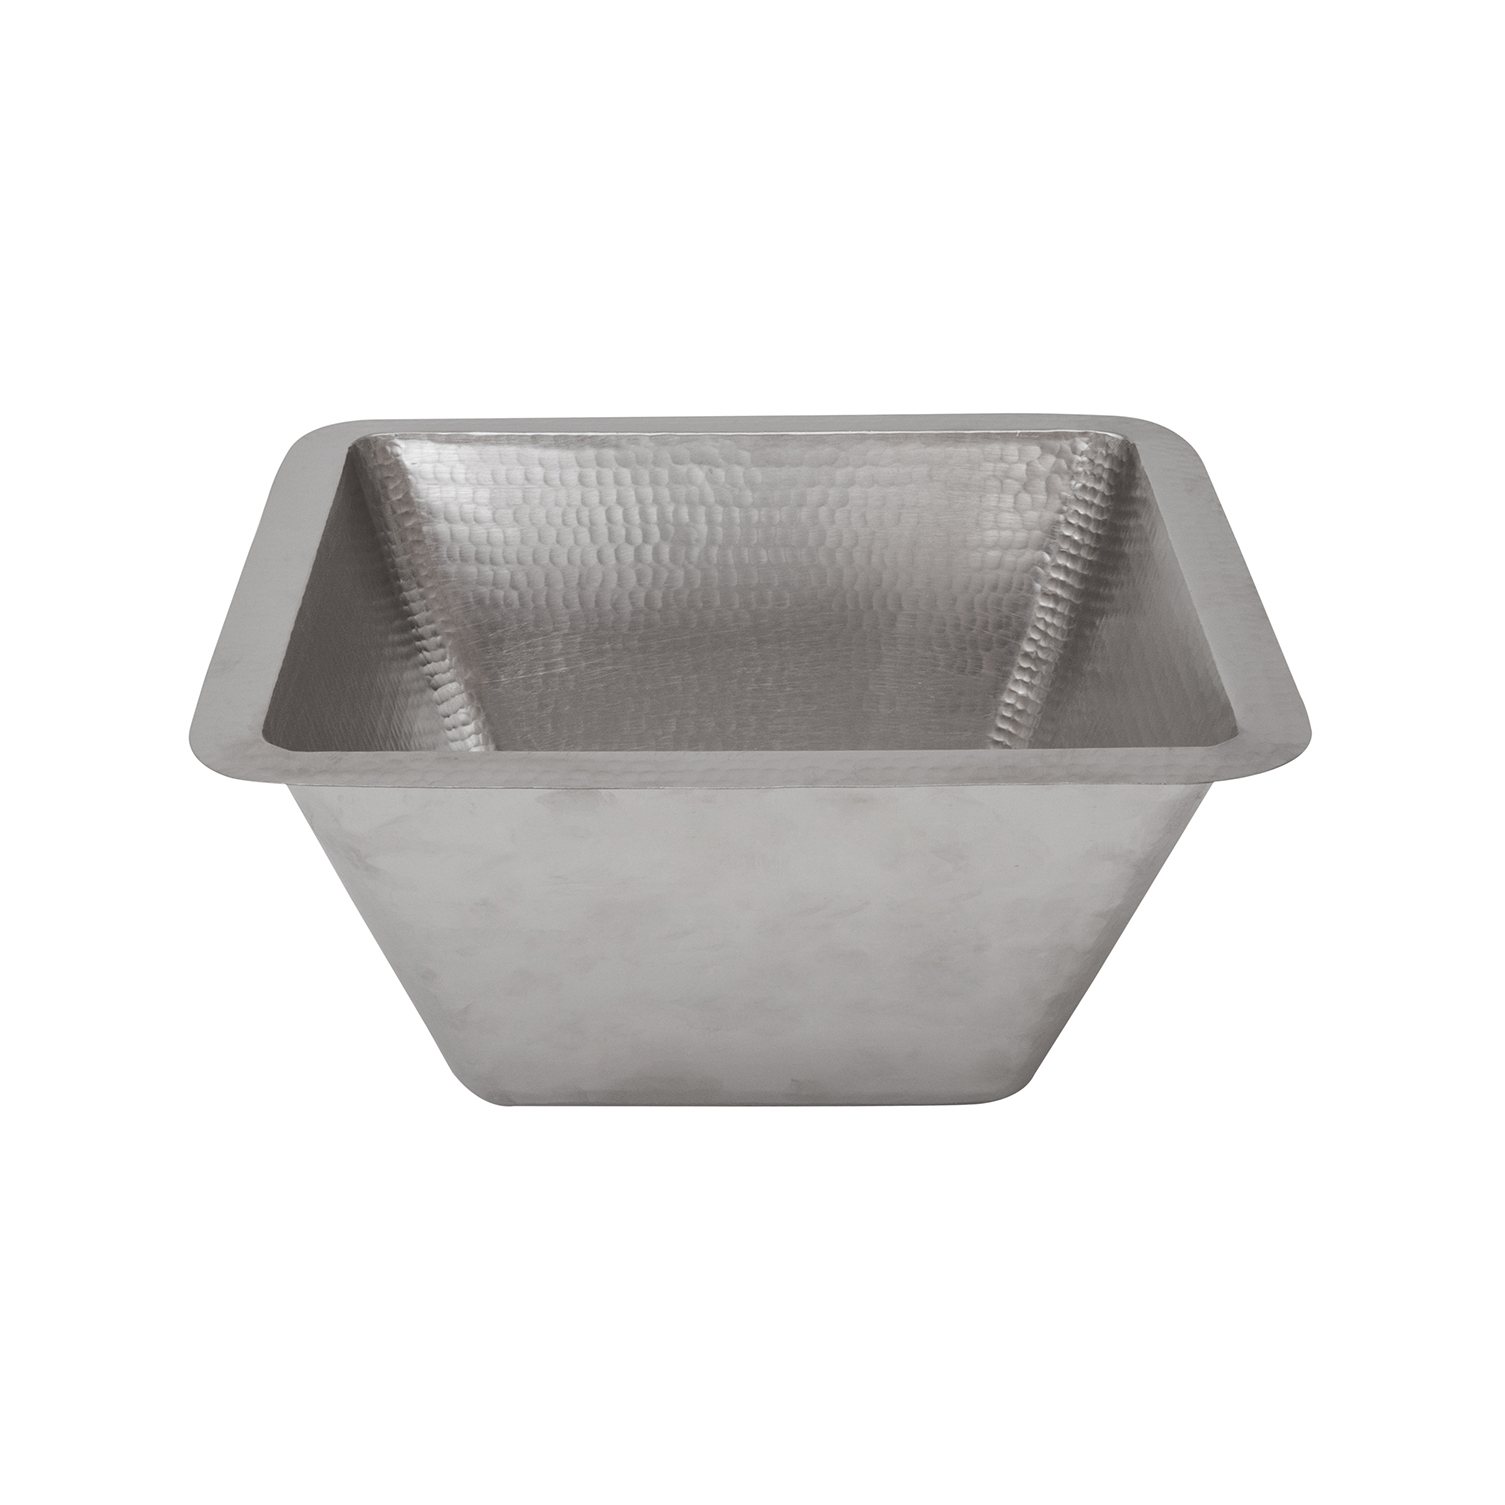 15" Square Under Counter Hammered Copper Bathroom Sink In Nickel